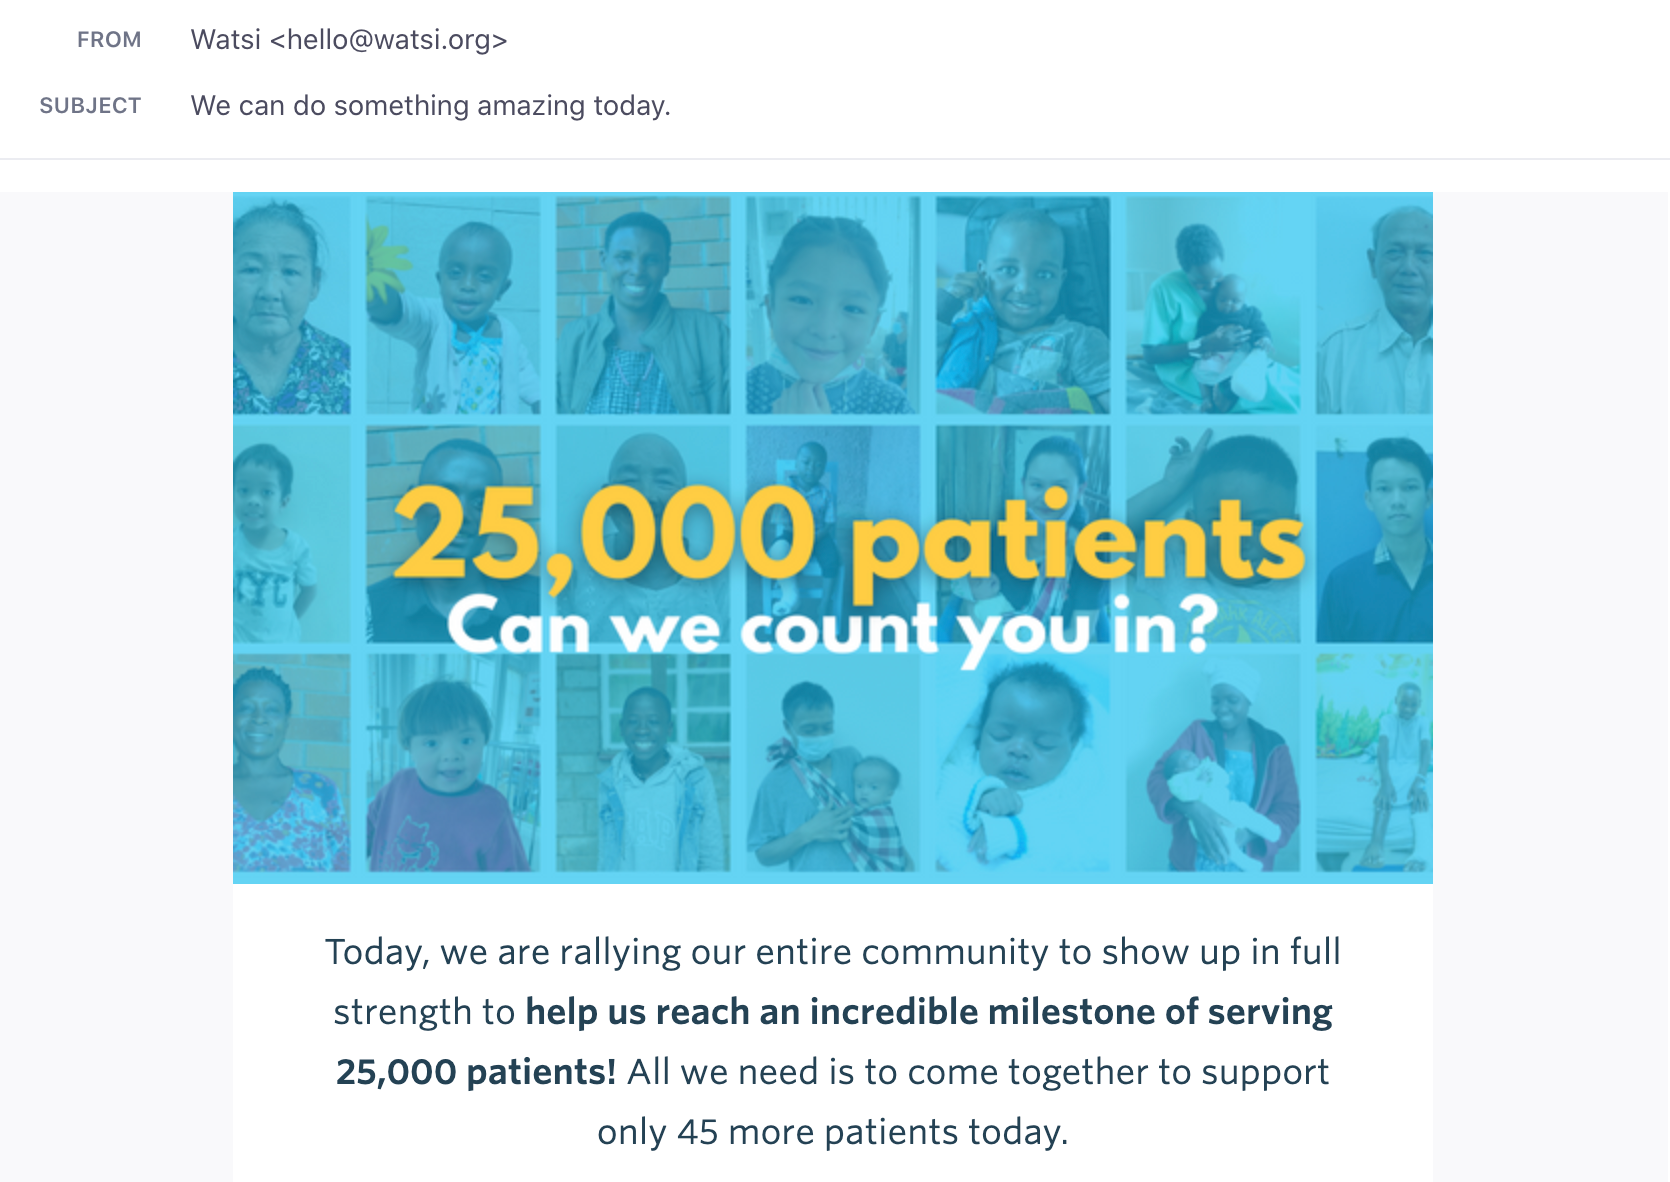 Our email asking our community to help us reach 25,000 patients.